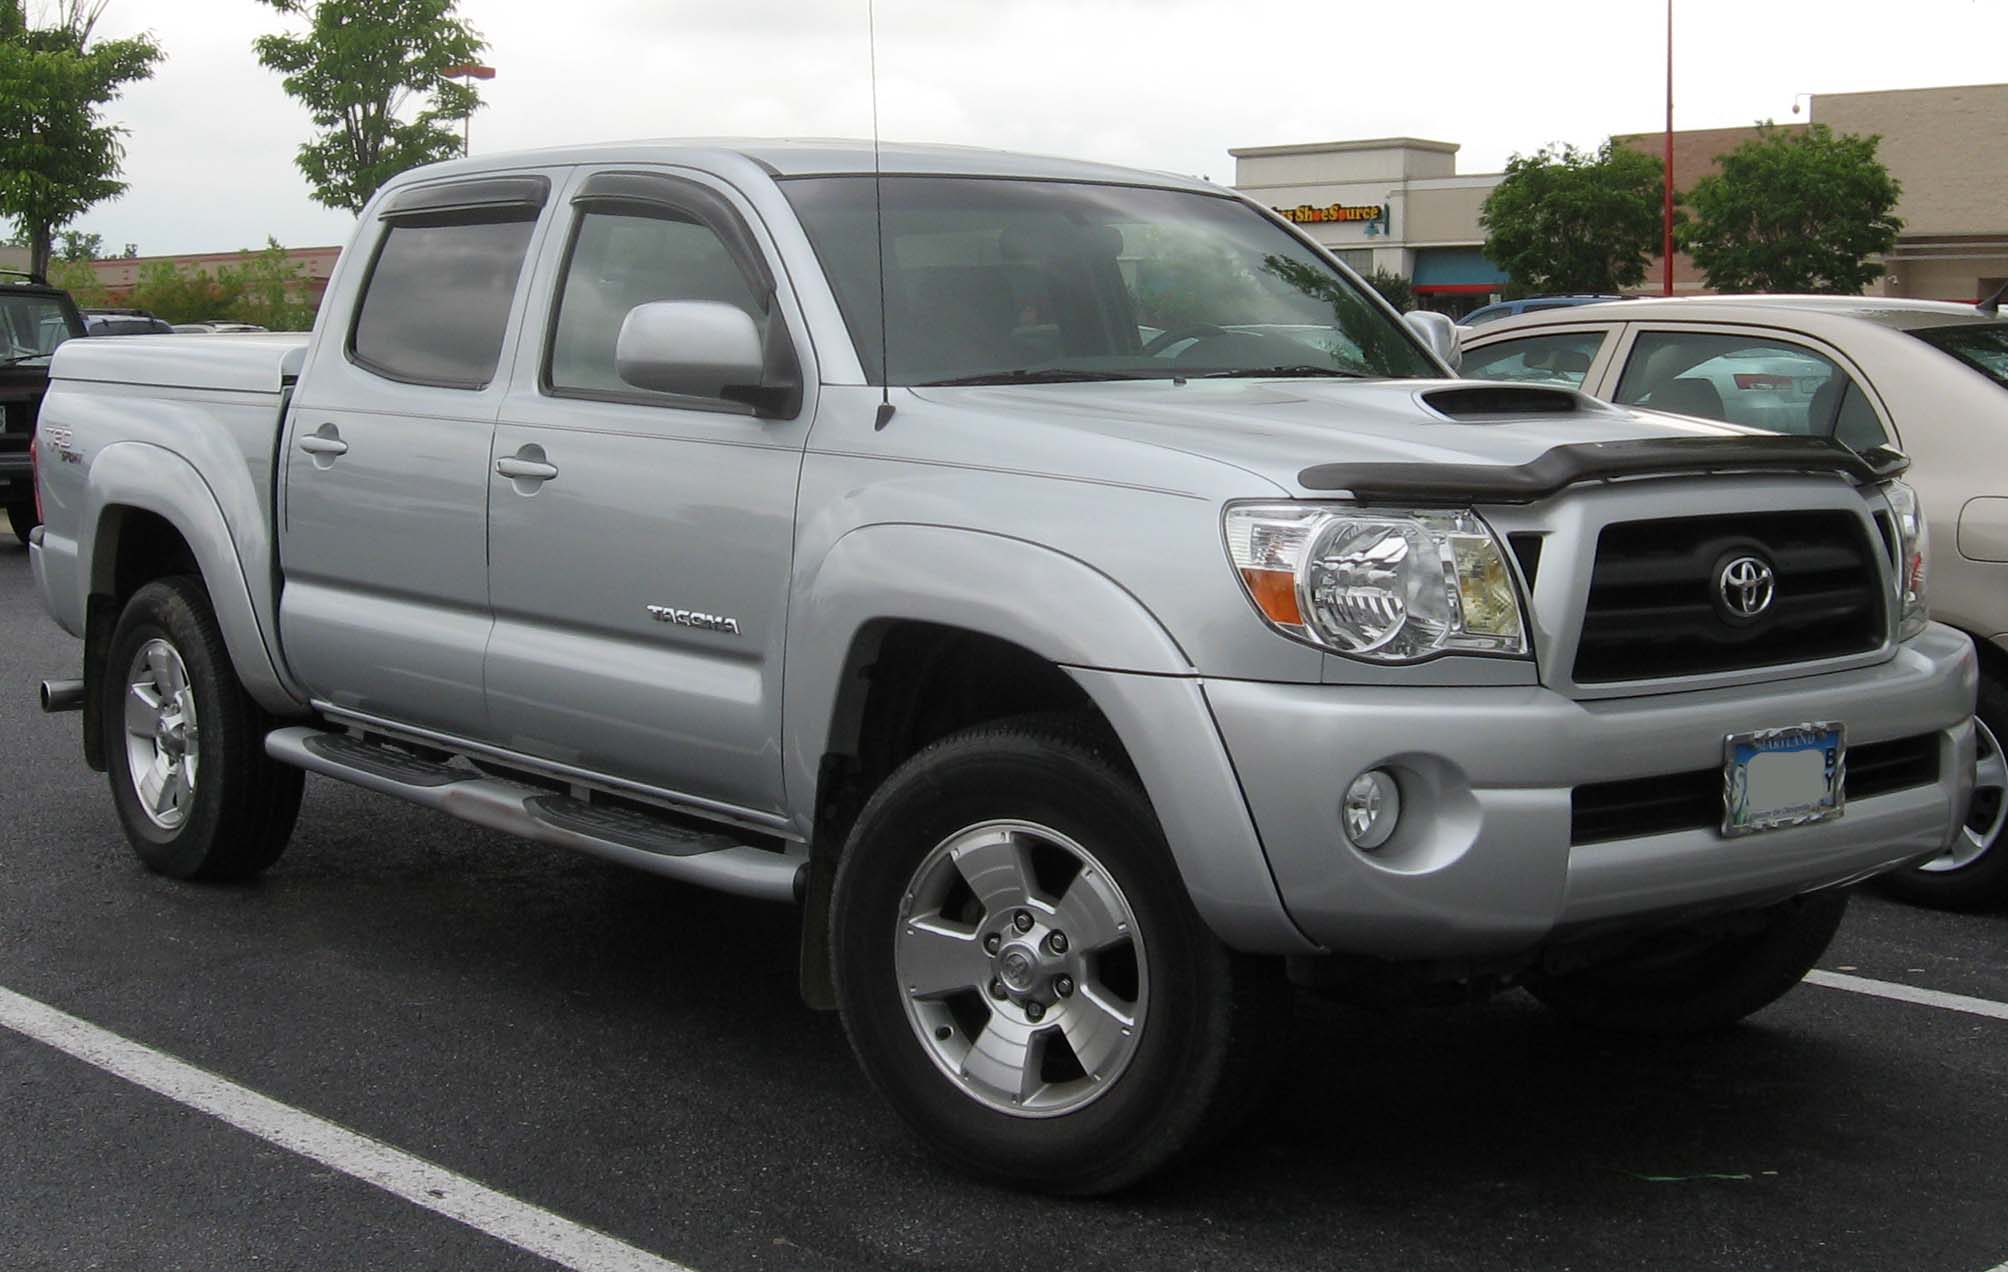 Toyota Tacoma 20937 Hd Wallpapers in Cars   Imagescicom 2008x1272